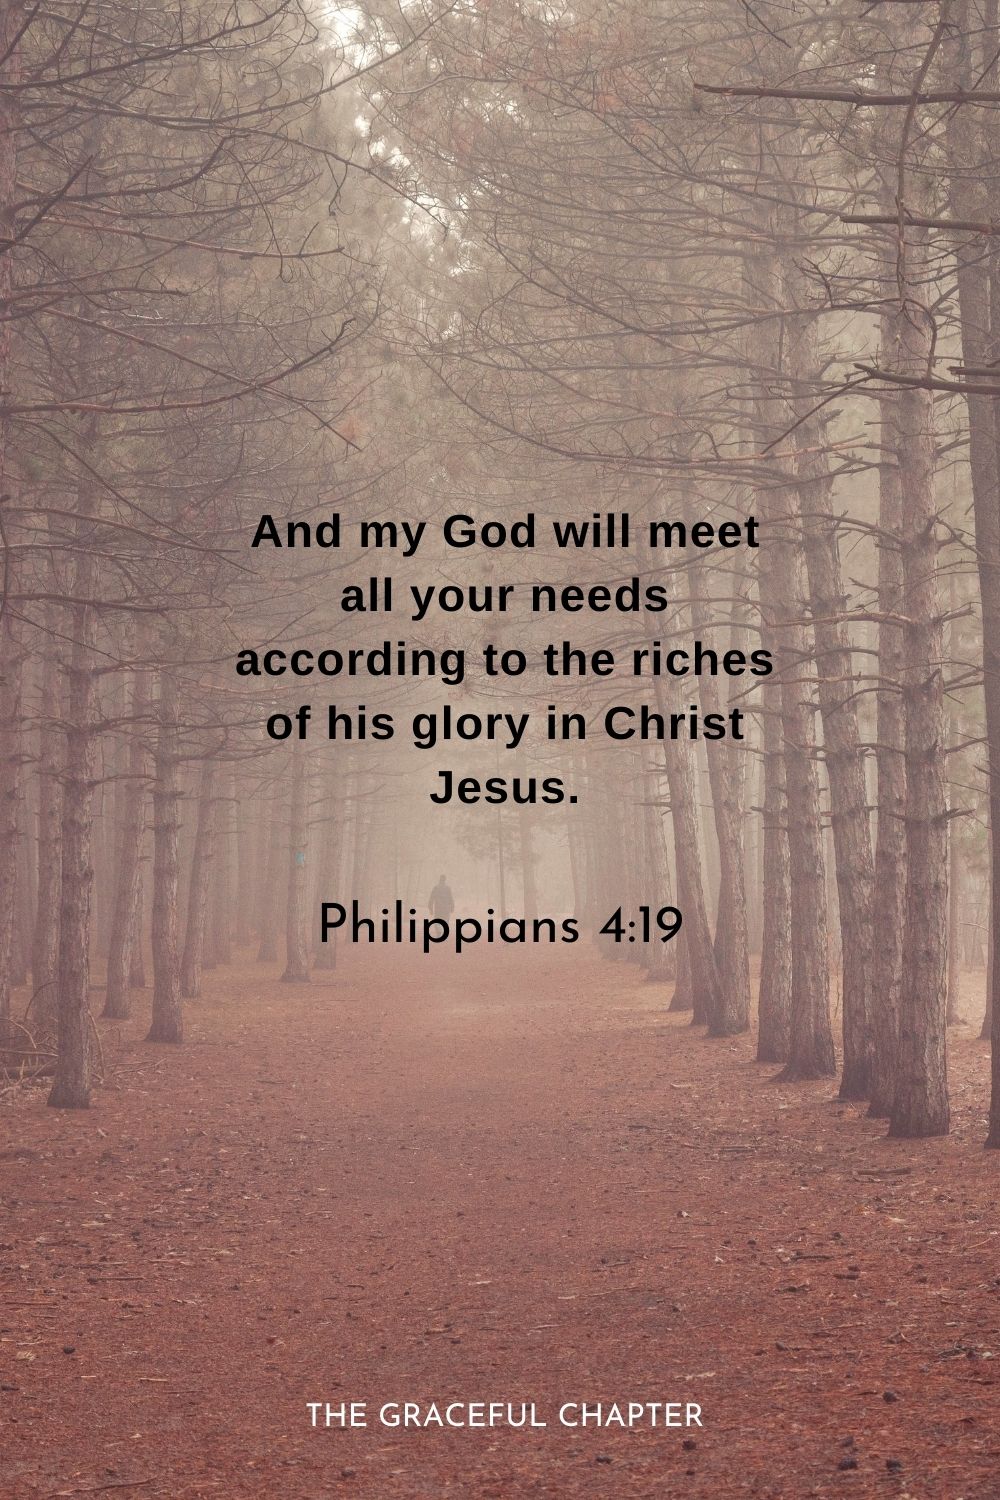 And my God will meet all your needs according to the riches of his glory in Christ Jesus.